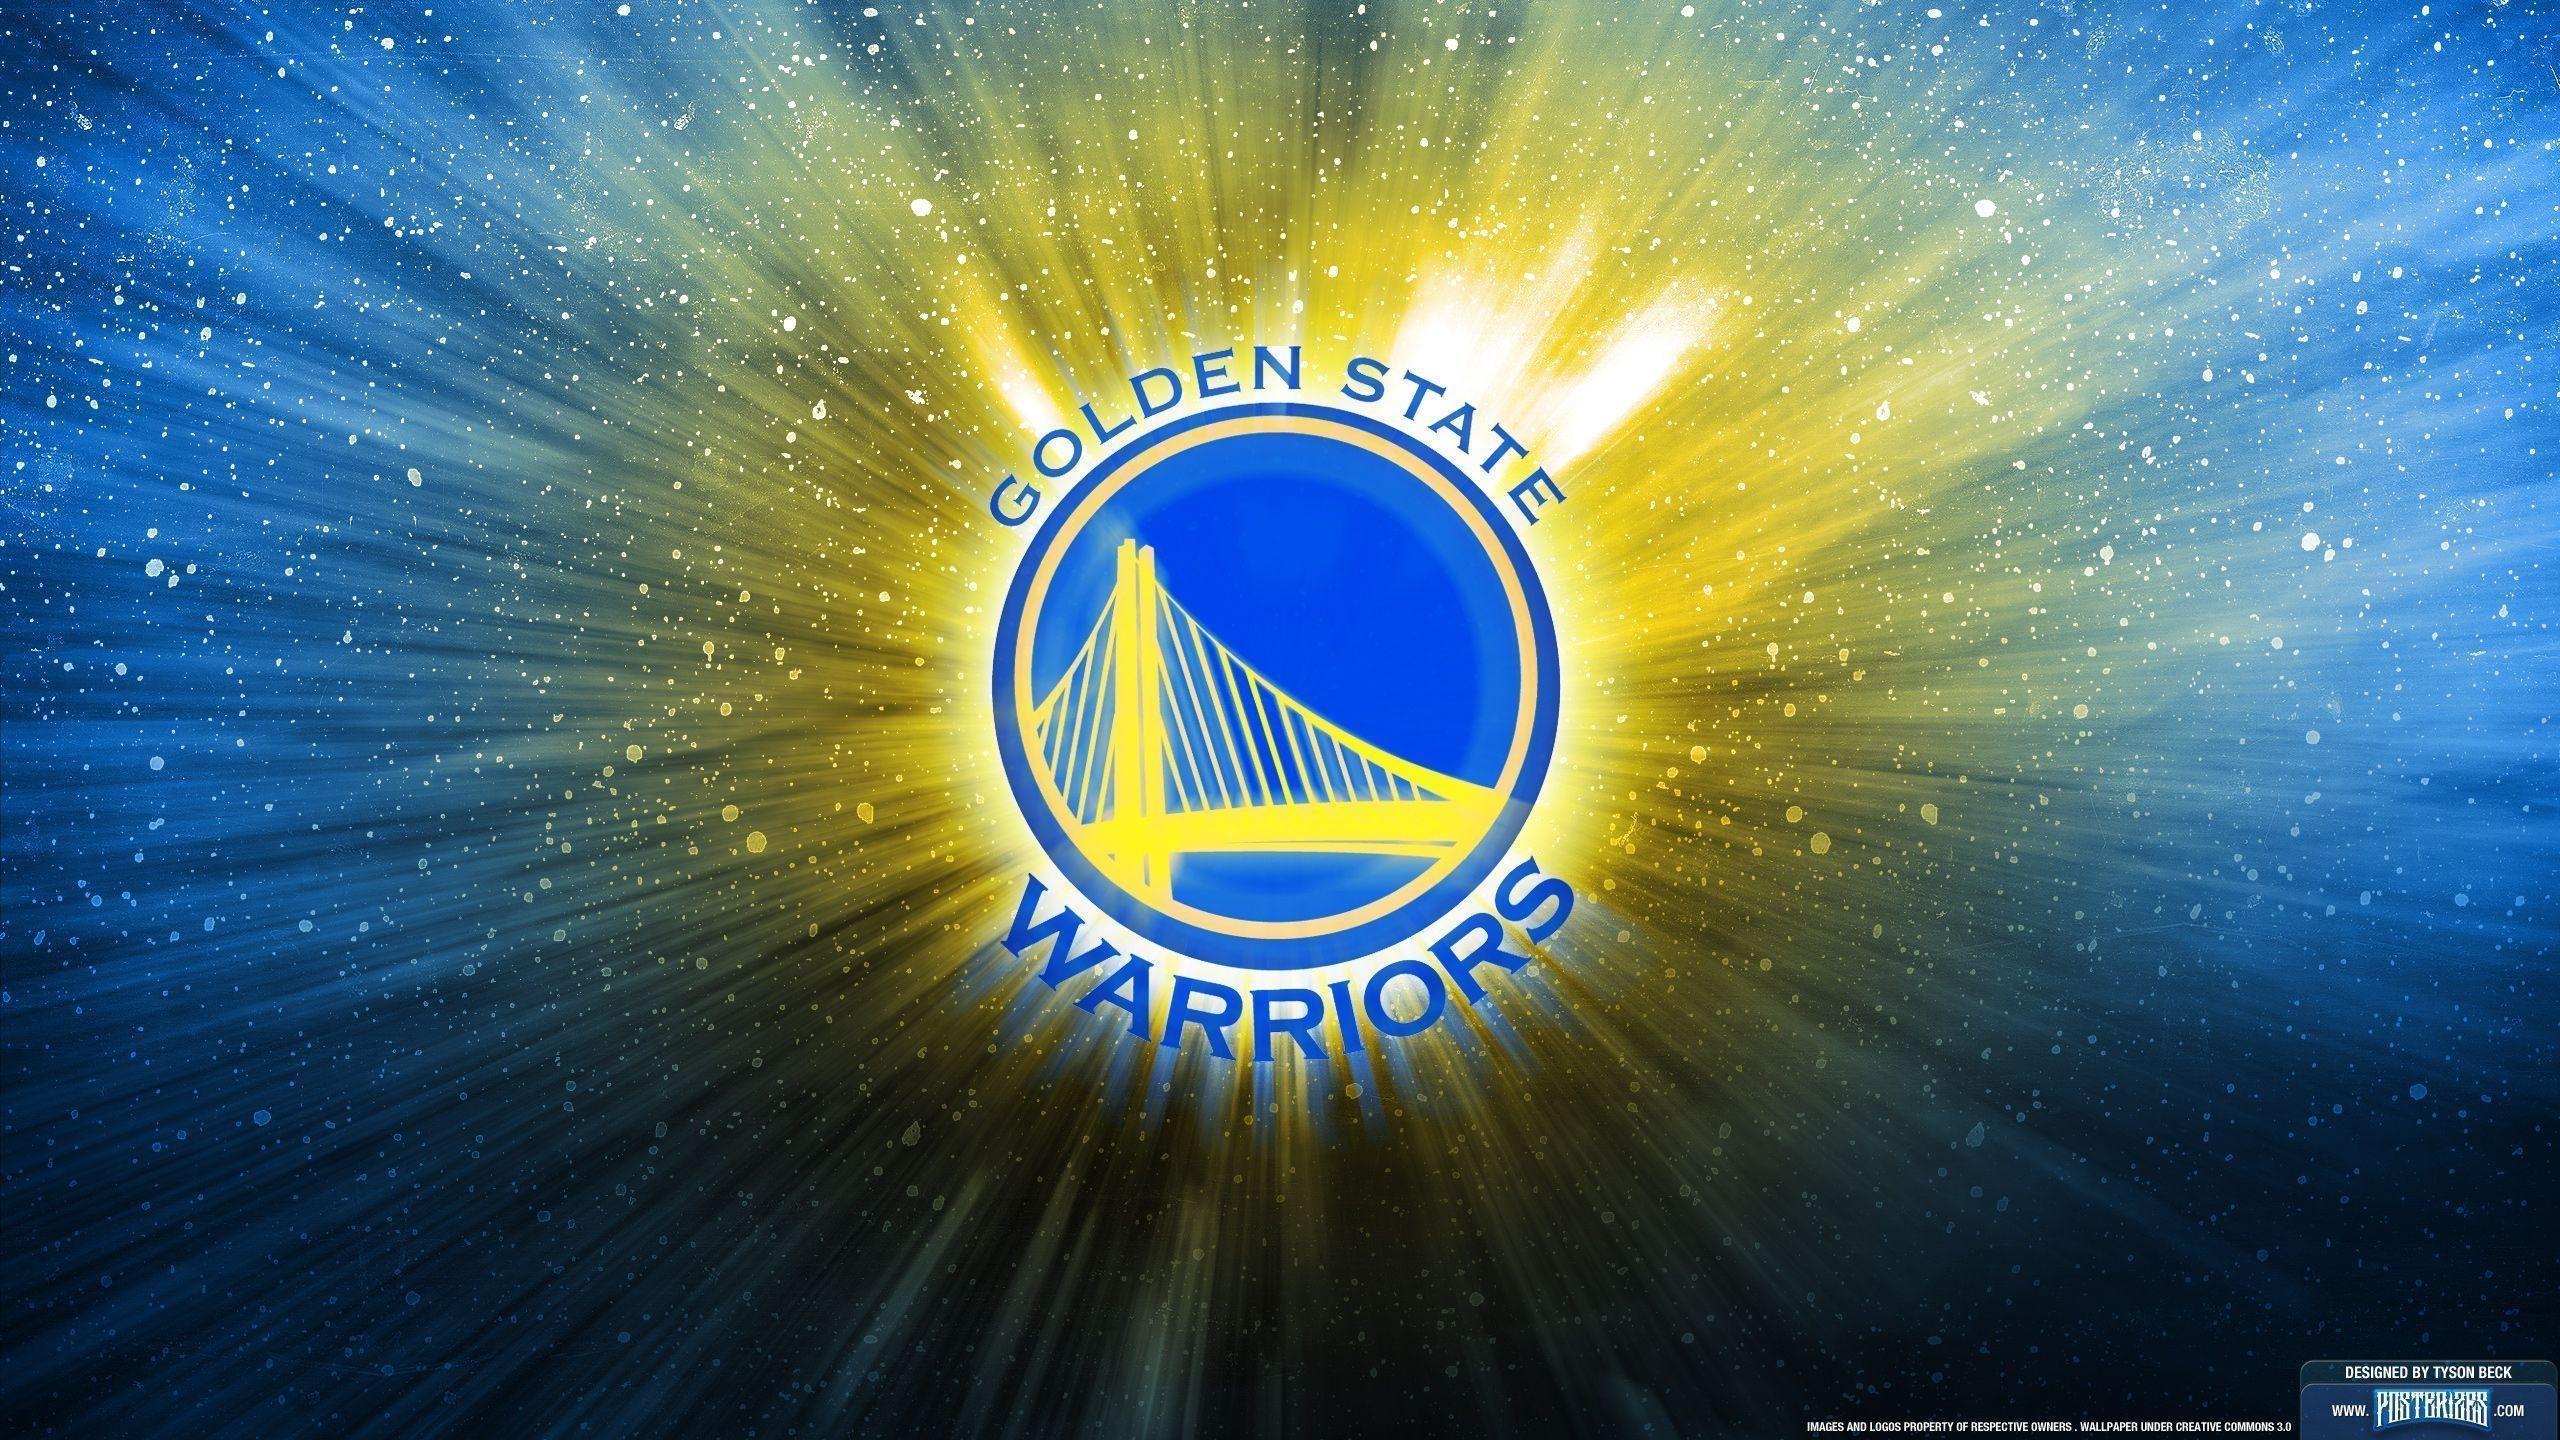 10 Most Popular Golden State Warriors Wallpapers FULL HD 1080p For PC Background